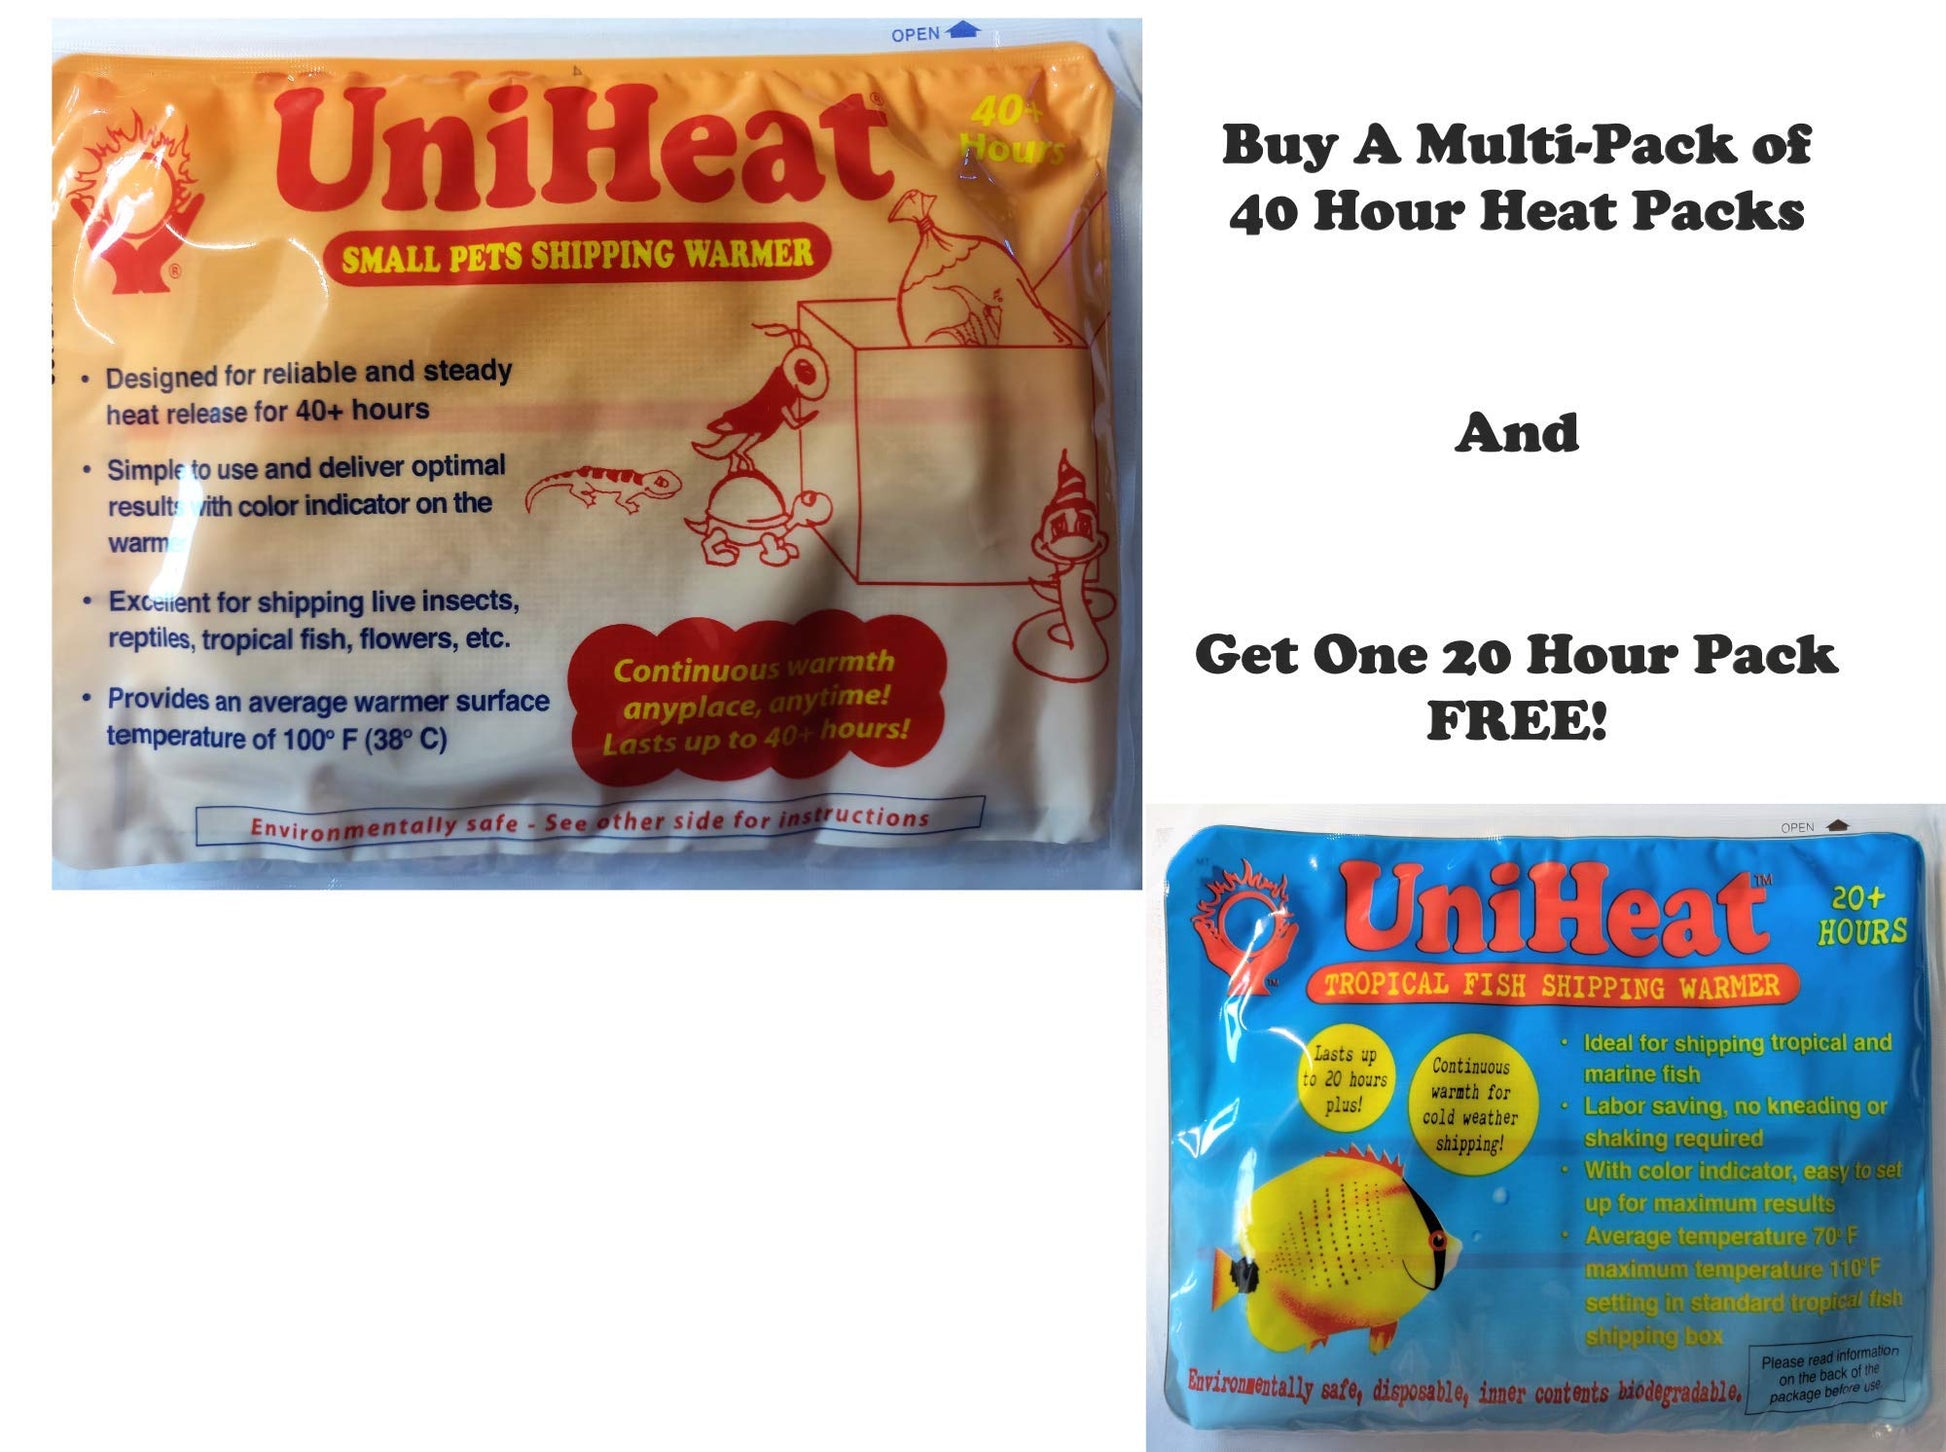 Uniheat Shipping Warmer 40+ Hours, 8 Pack ! - Opticdeals